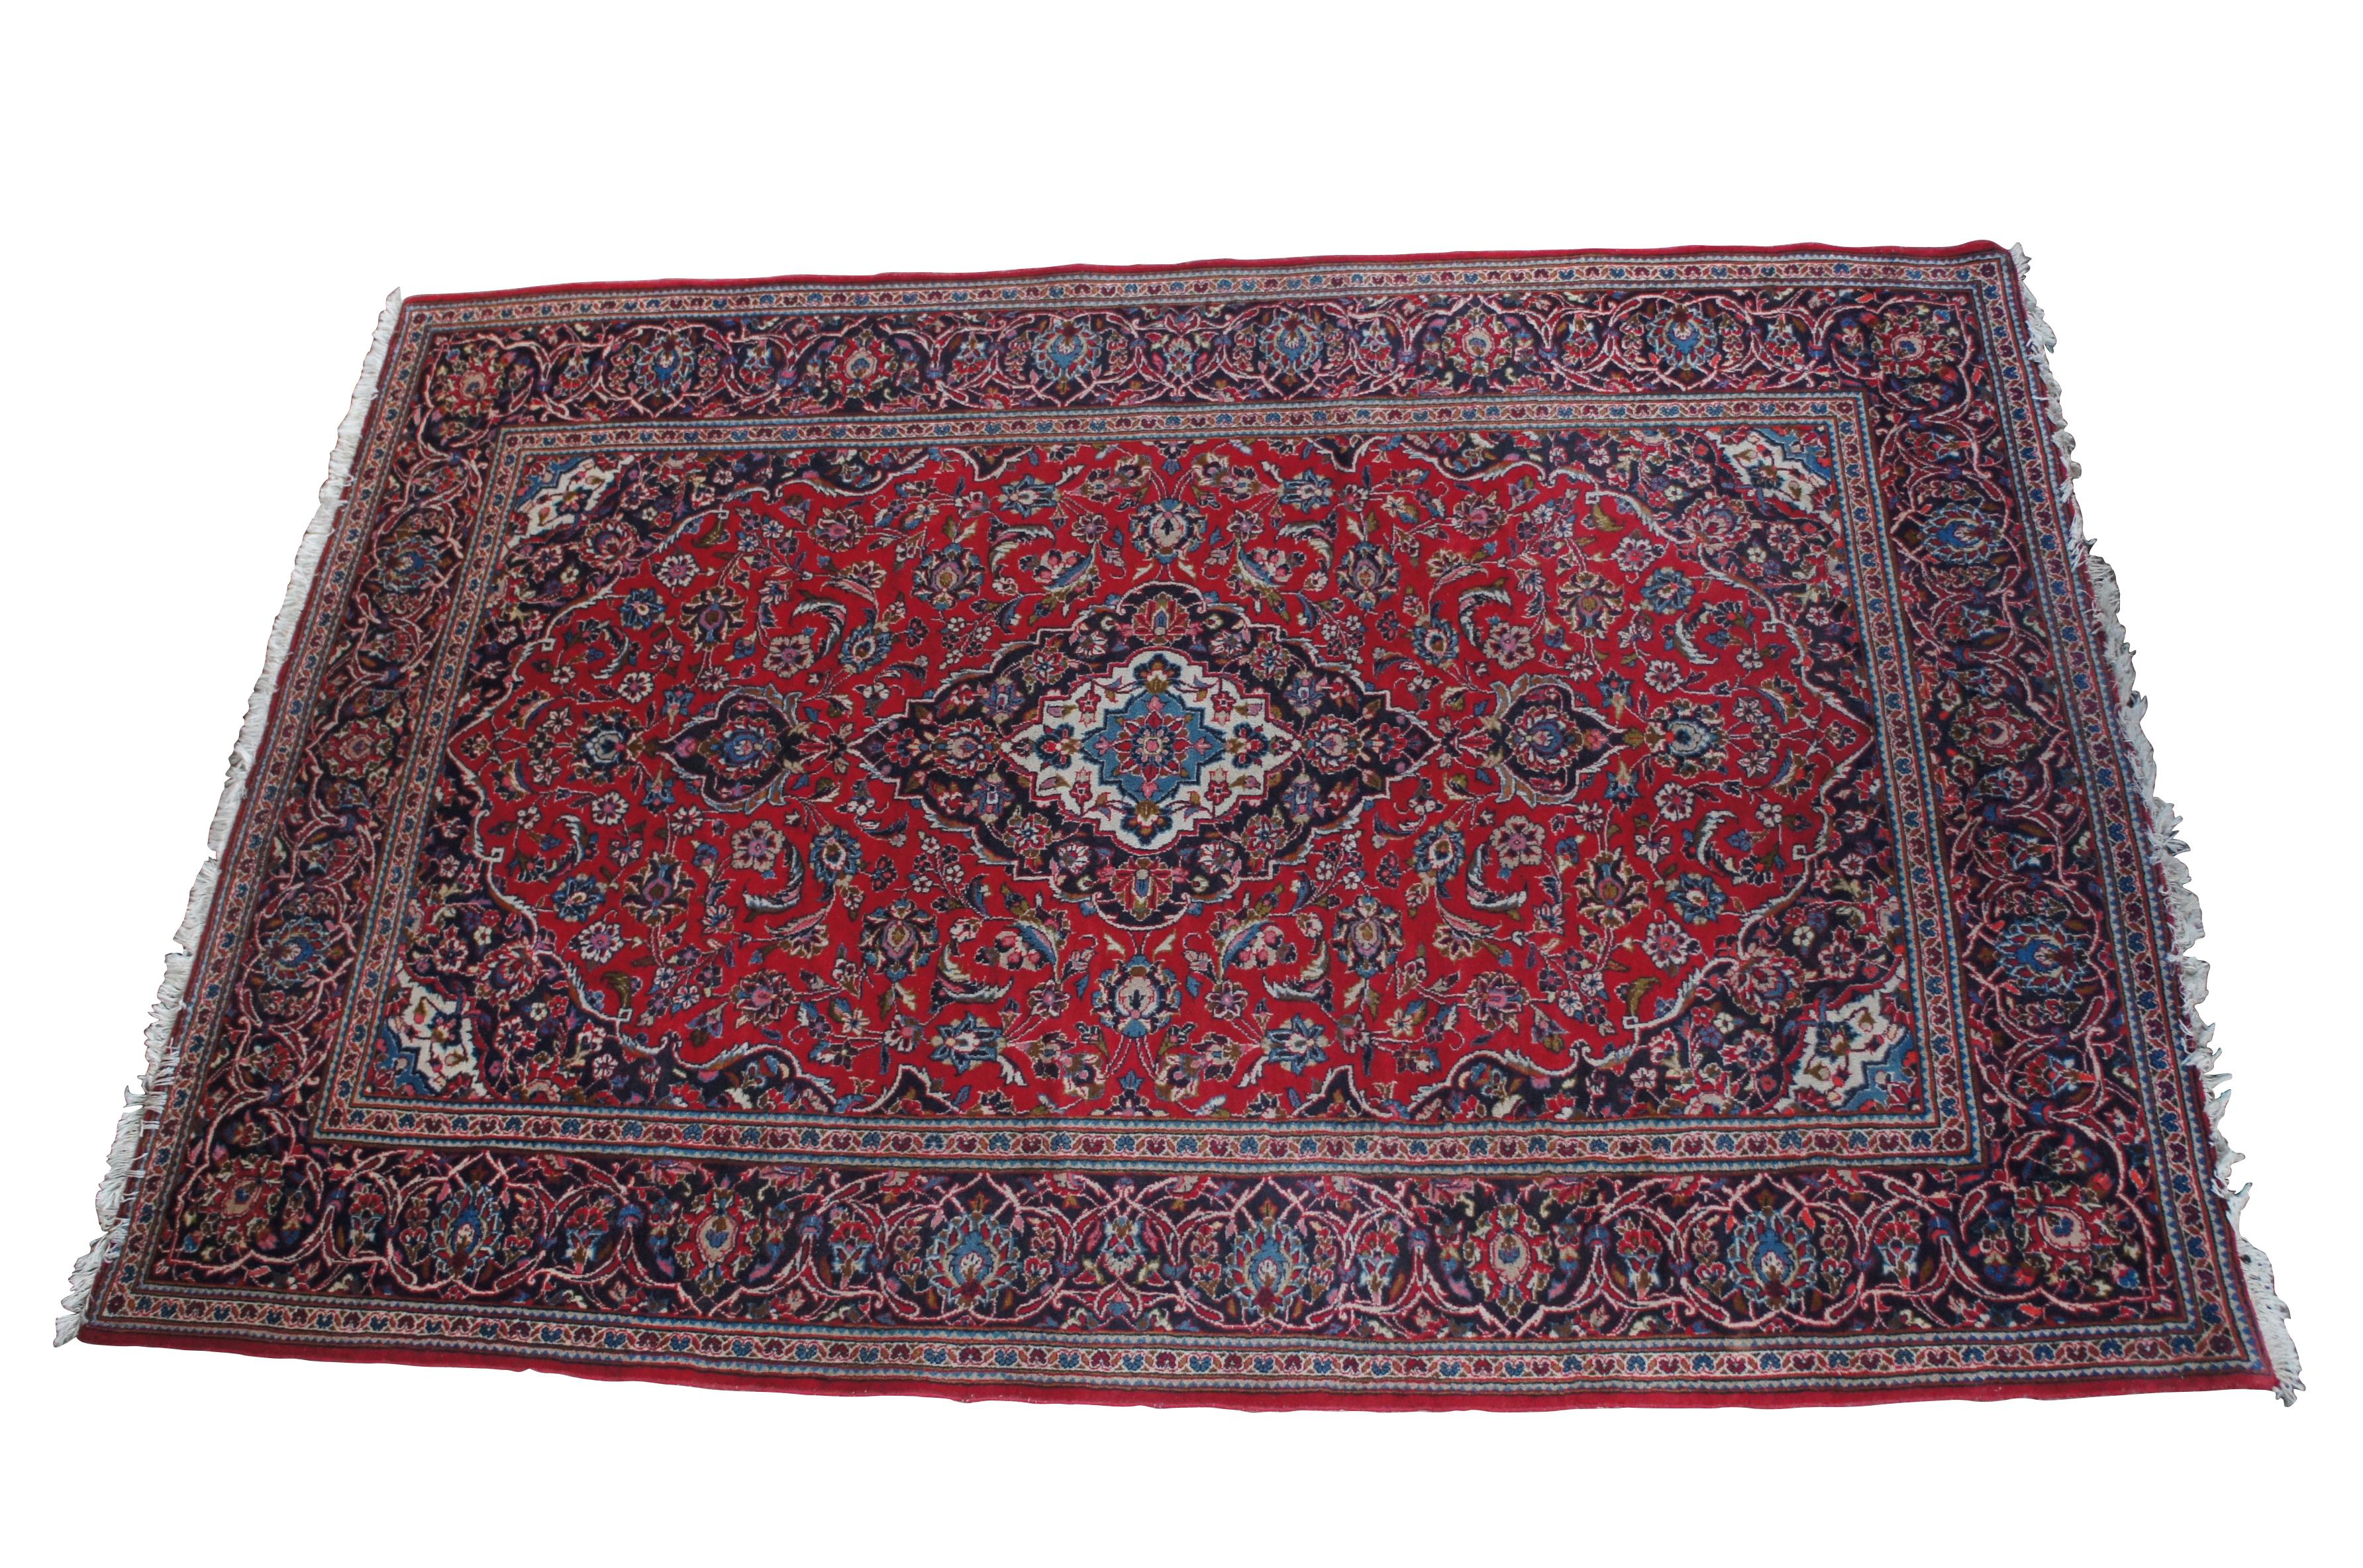 Hand-Knotted Vintage Hand Knotted Kashan Persian Blue & Red Wool Area Rug Carpet 6.5' x 10' For Sale